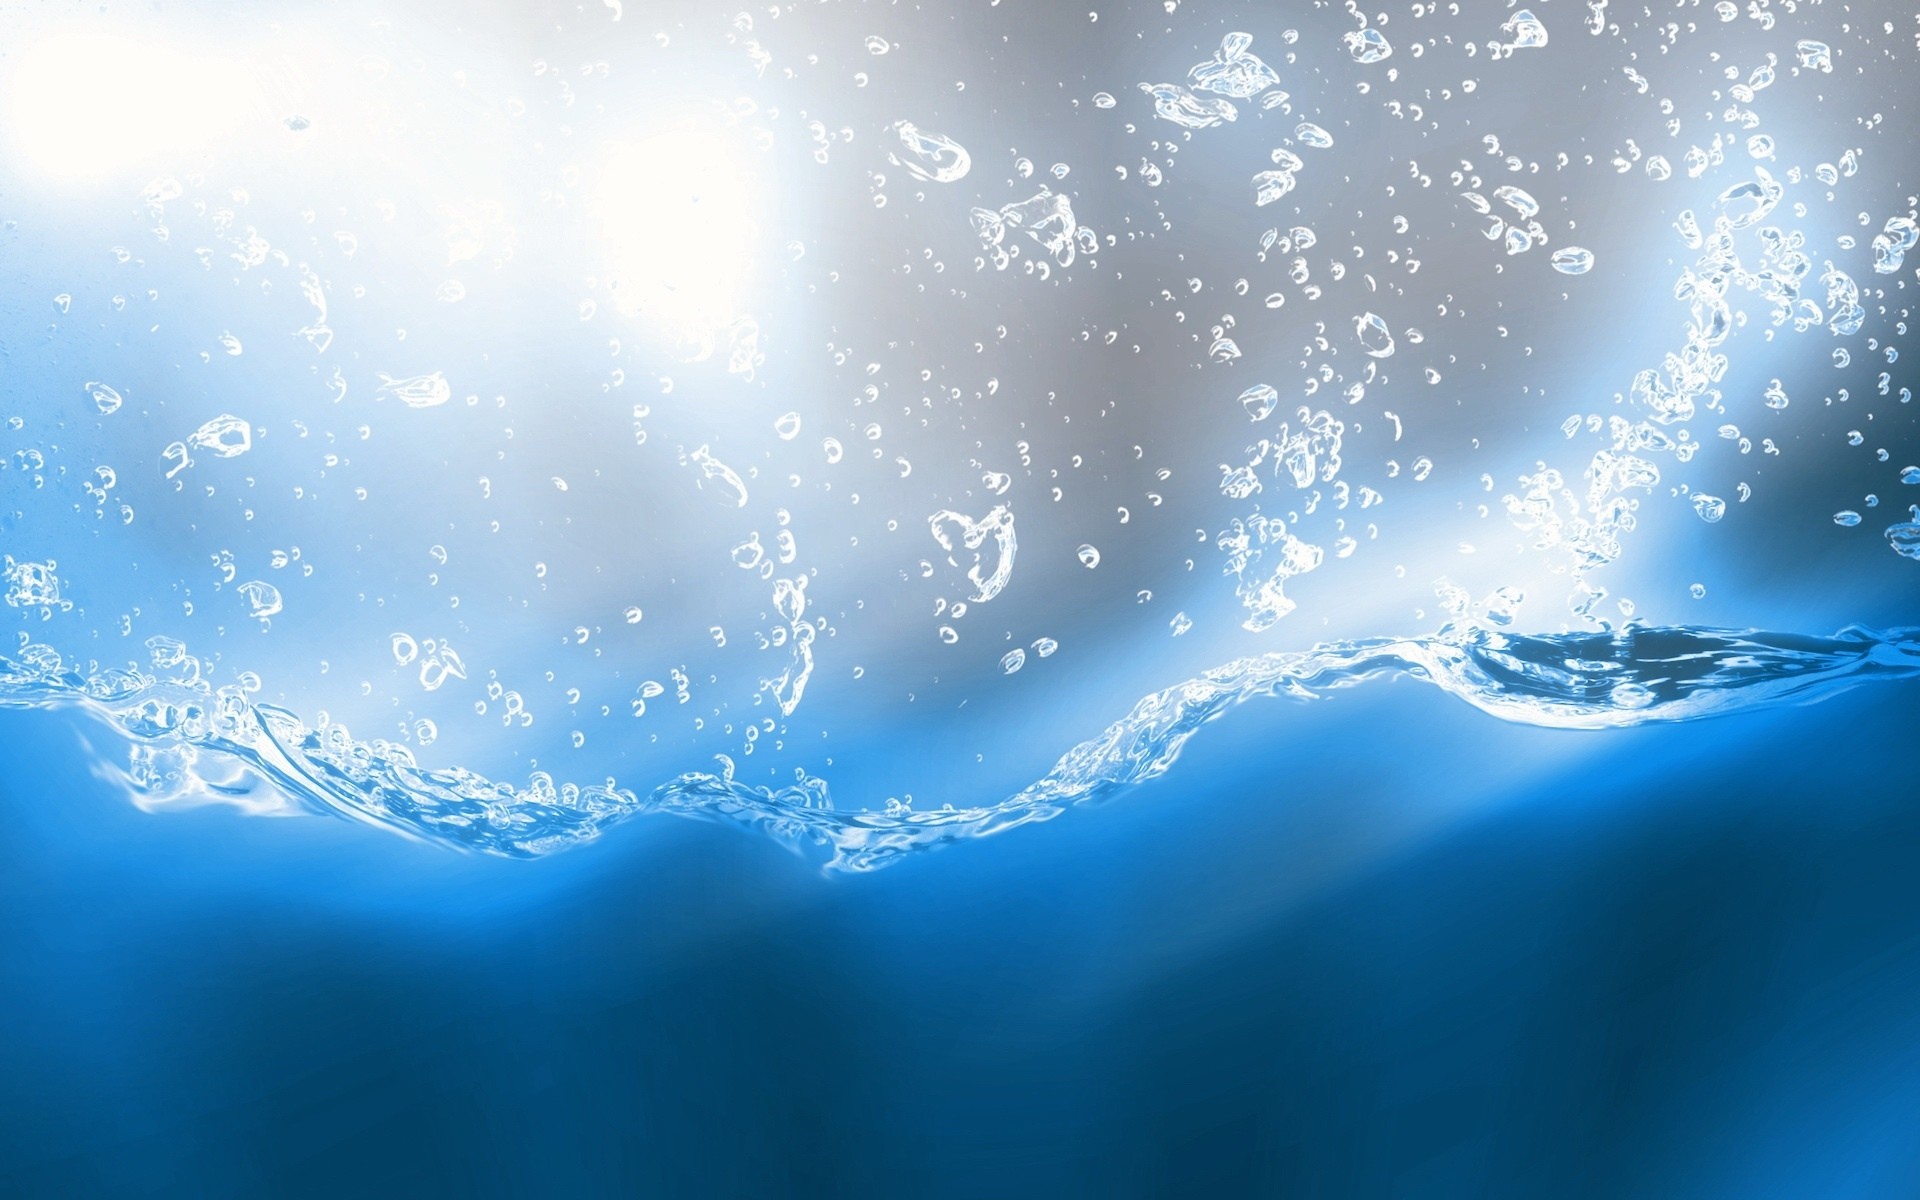 Wallpapers For Bright - Water Bubbles Hd Background - HD Wallpaper 